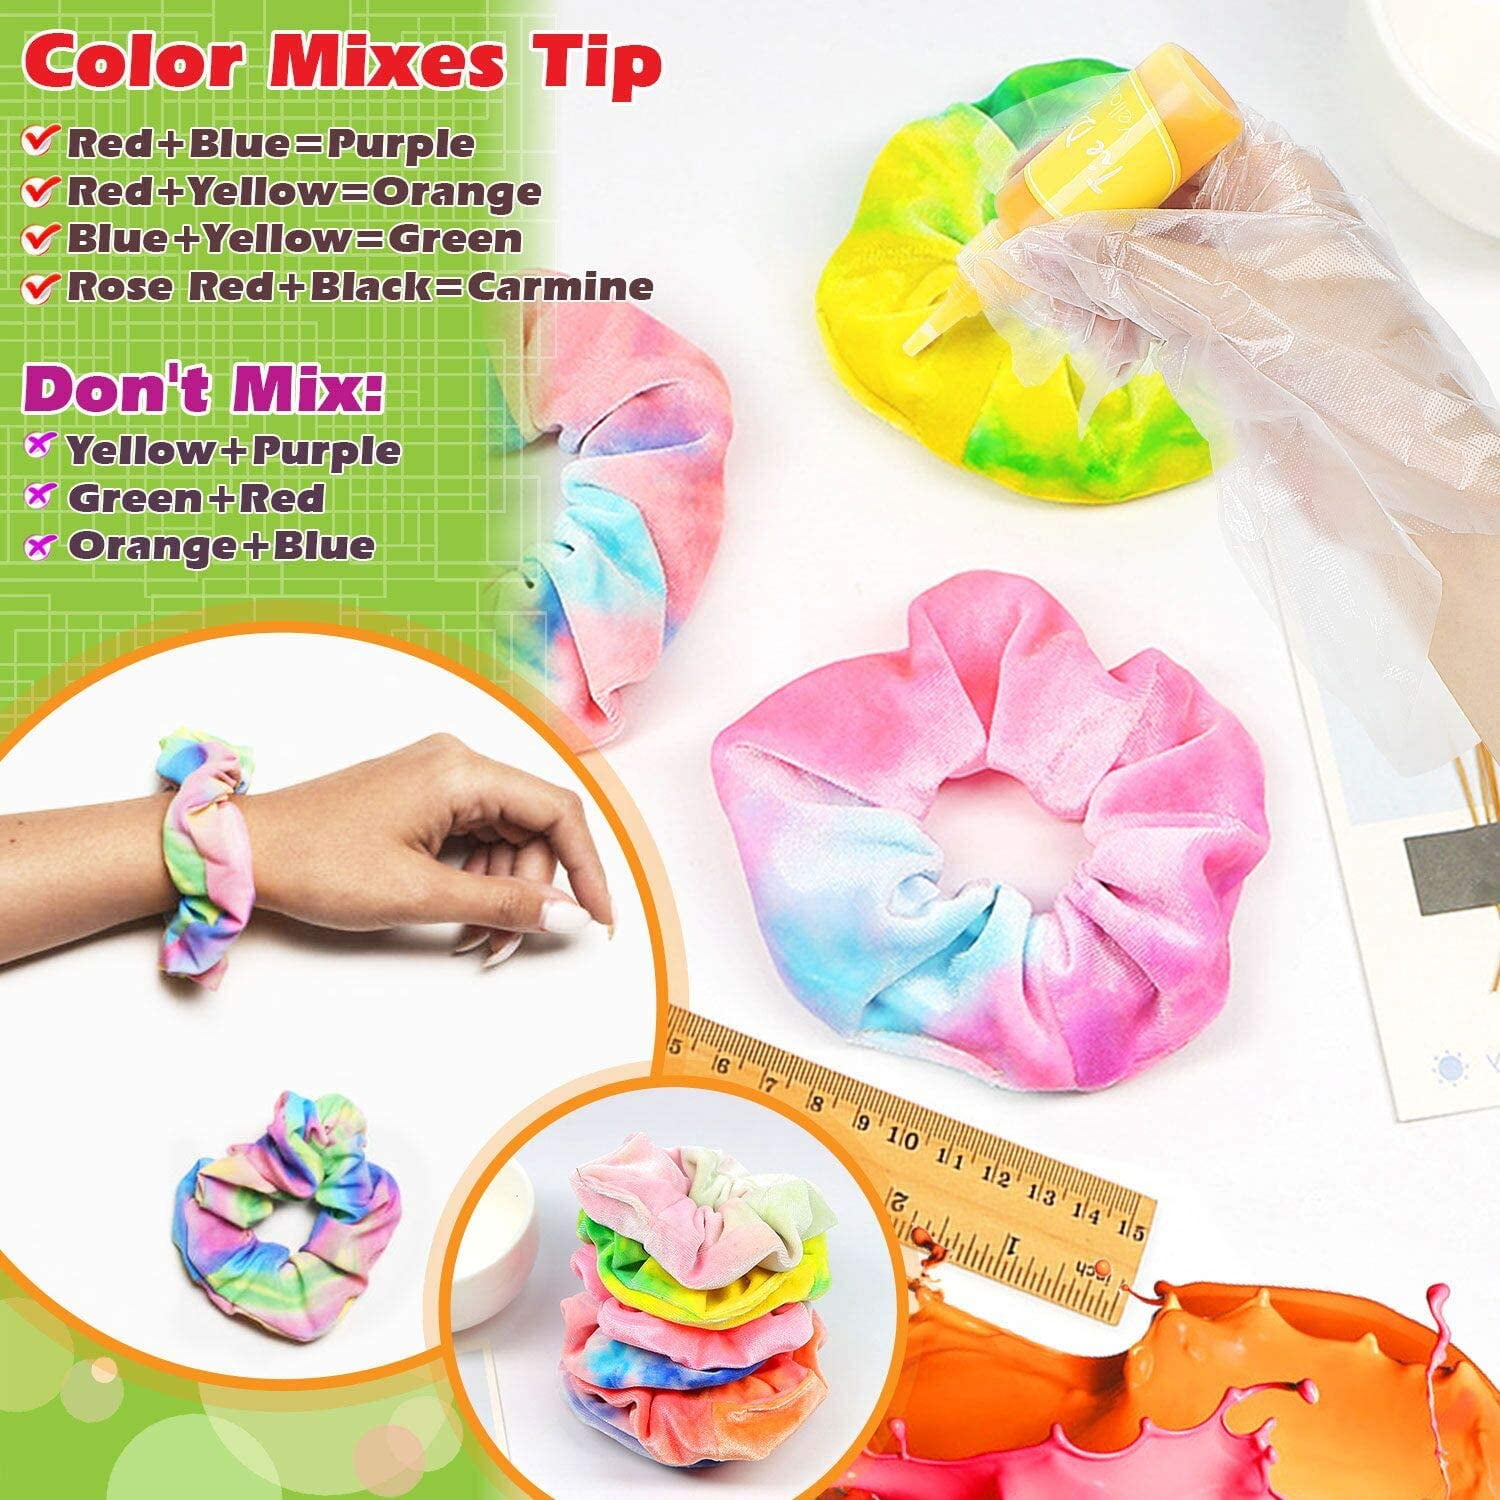 26 Colors Tie Dye Kit for Kids and Adults, 5 Fabric Markers, Plastic  Stencil for DIY Fabric Dye Projects. 175 Pack Party Tie Die Supplies with  Aprons